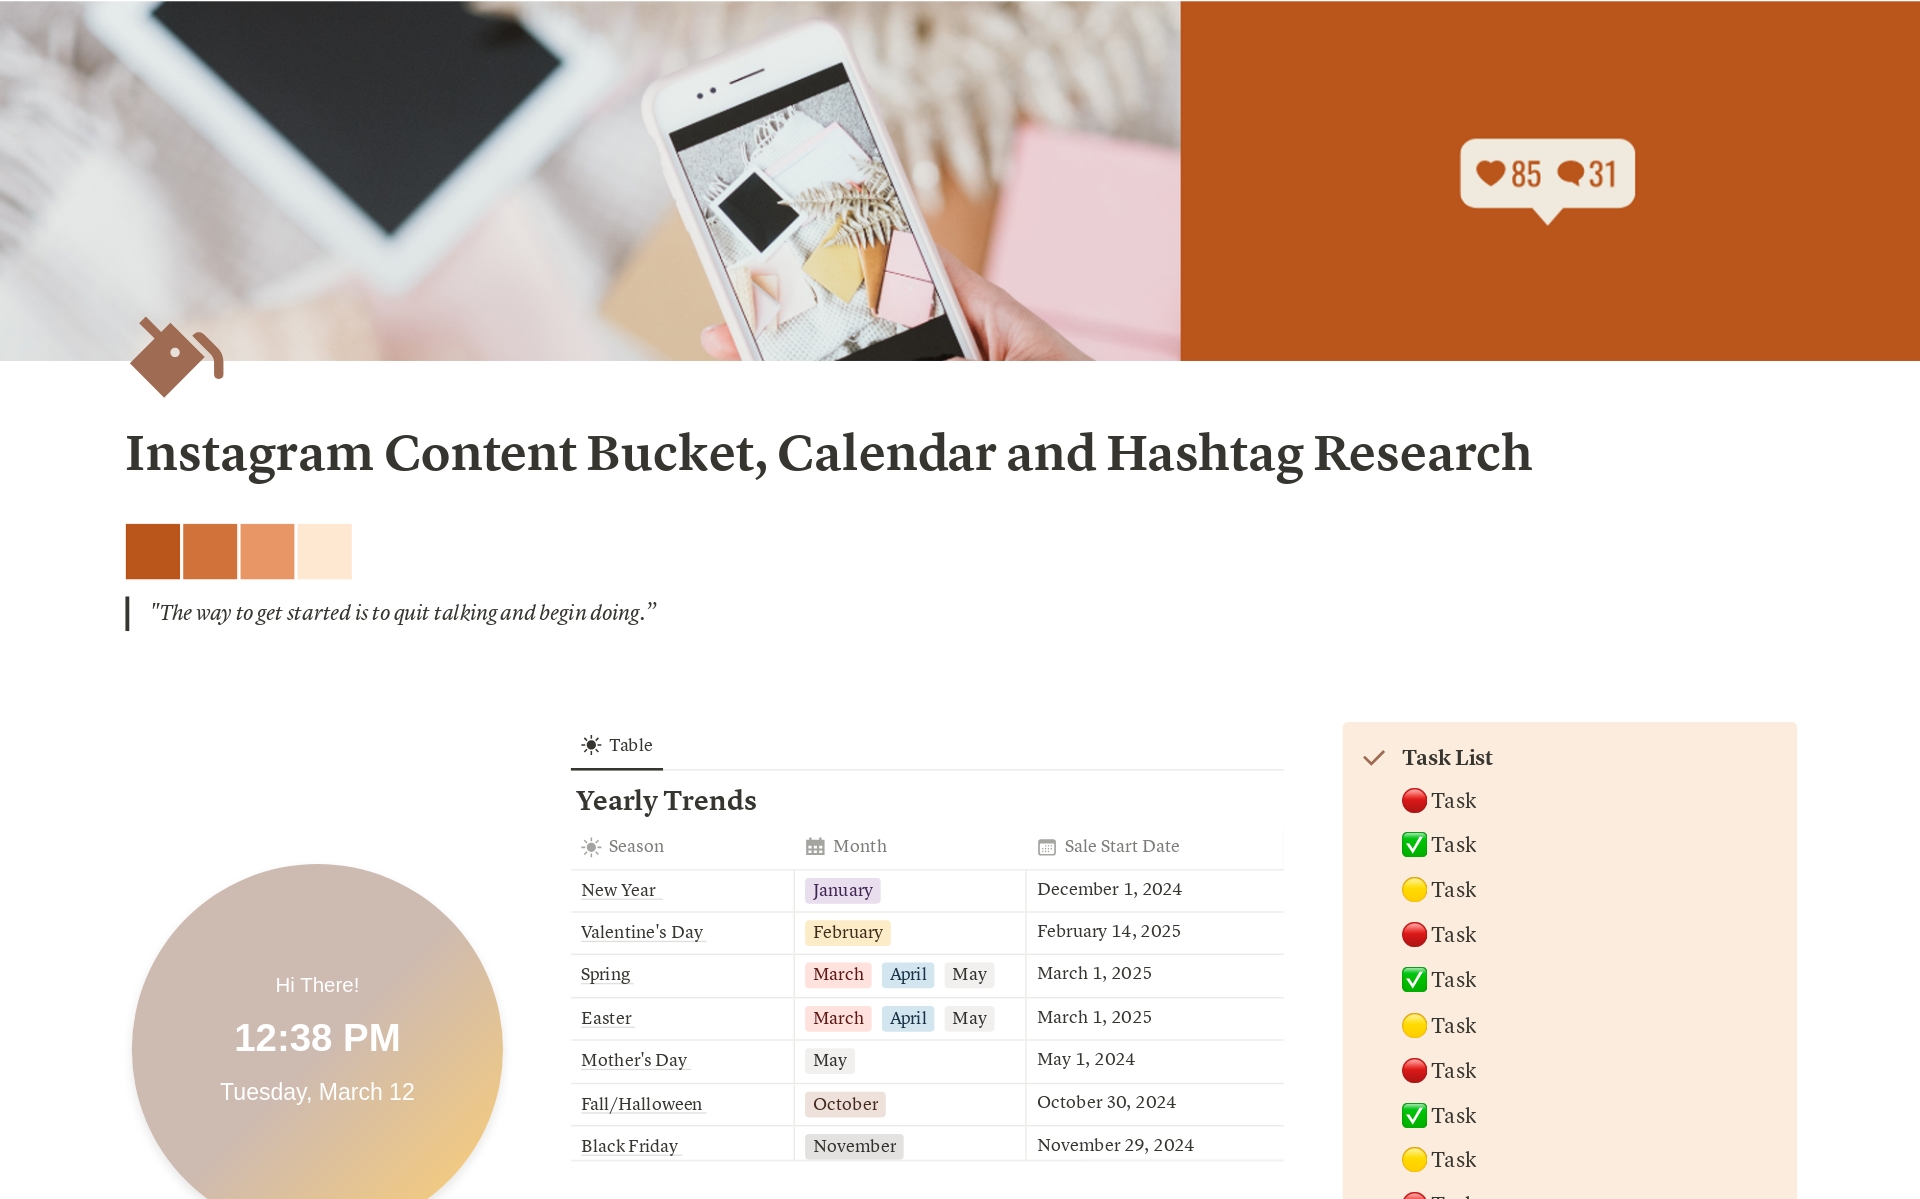 A go-to Content Workflow for your killer Instagram profile

Features: Yearly Trends, Task List, Content Bucket and Hashtag, Content Production, Content Calendar and Mood Board